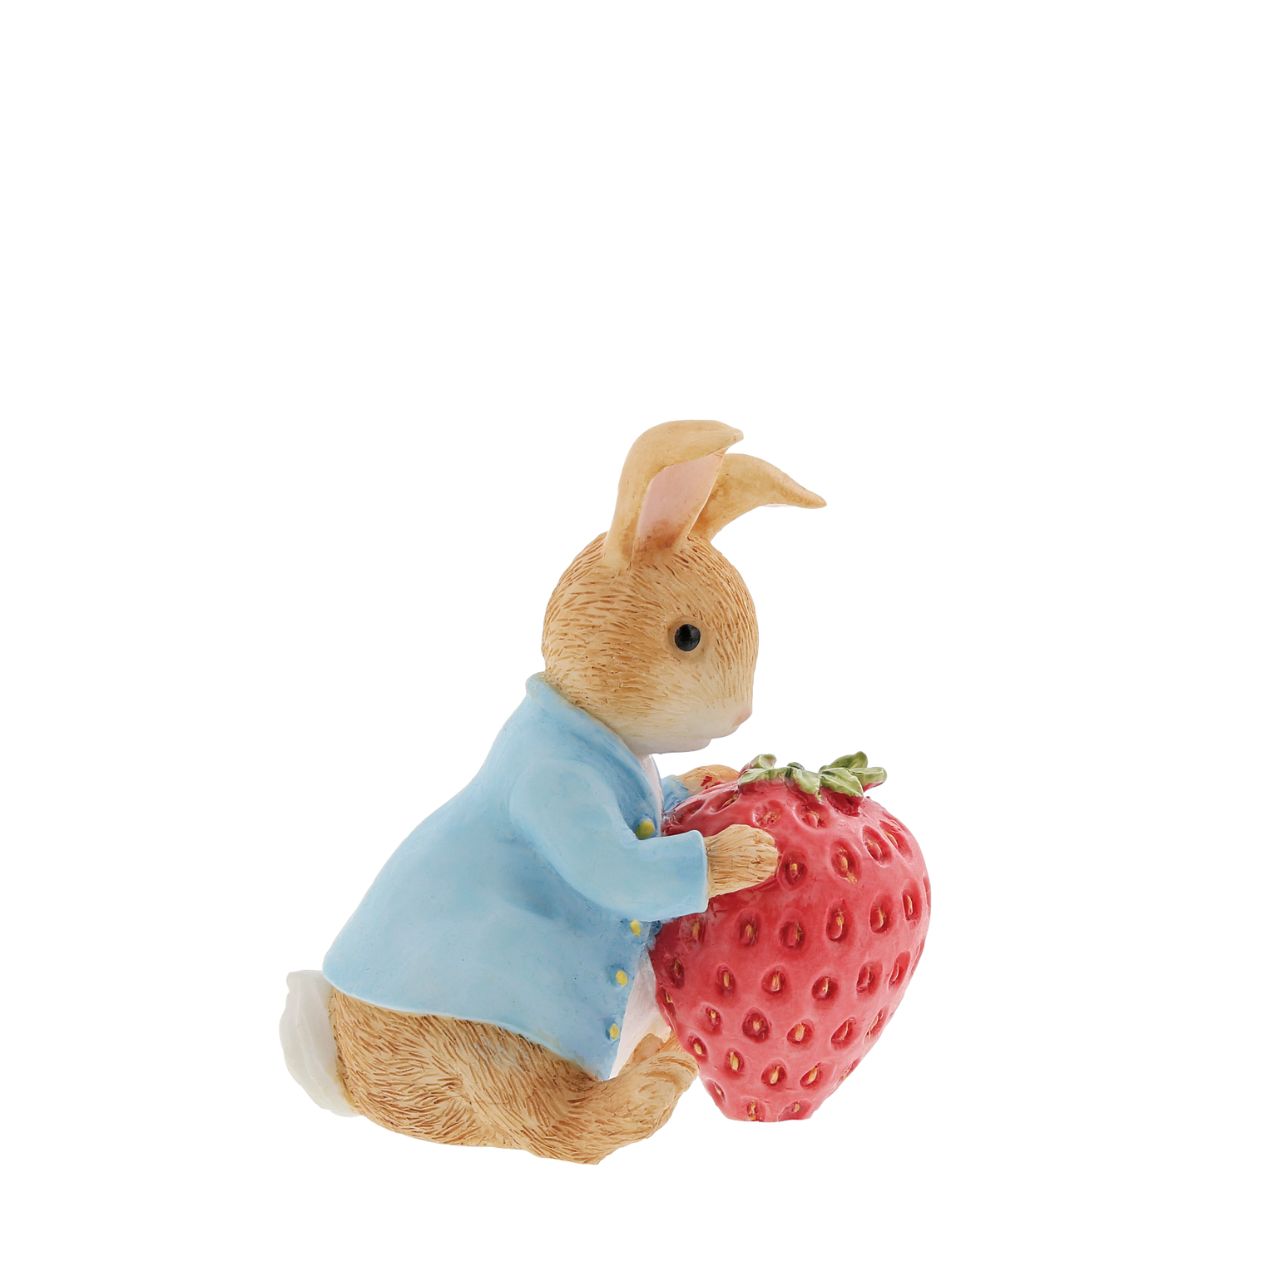 Beatrix Potter Peter Rabbit with Strawberry Figurine  Our mischievous and lovable bunny is ready to munch his way through this gigantic strawberry. This unique pose makes a treasured keepsake or gift for a Peter Rabbit lover. Created from newly drawn artworks helping to bring the featured character to life.